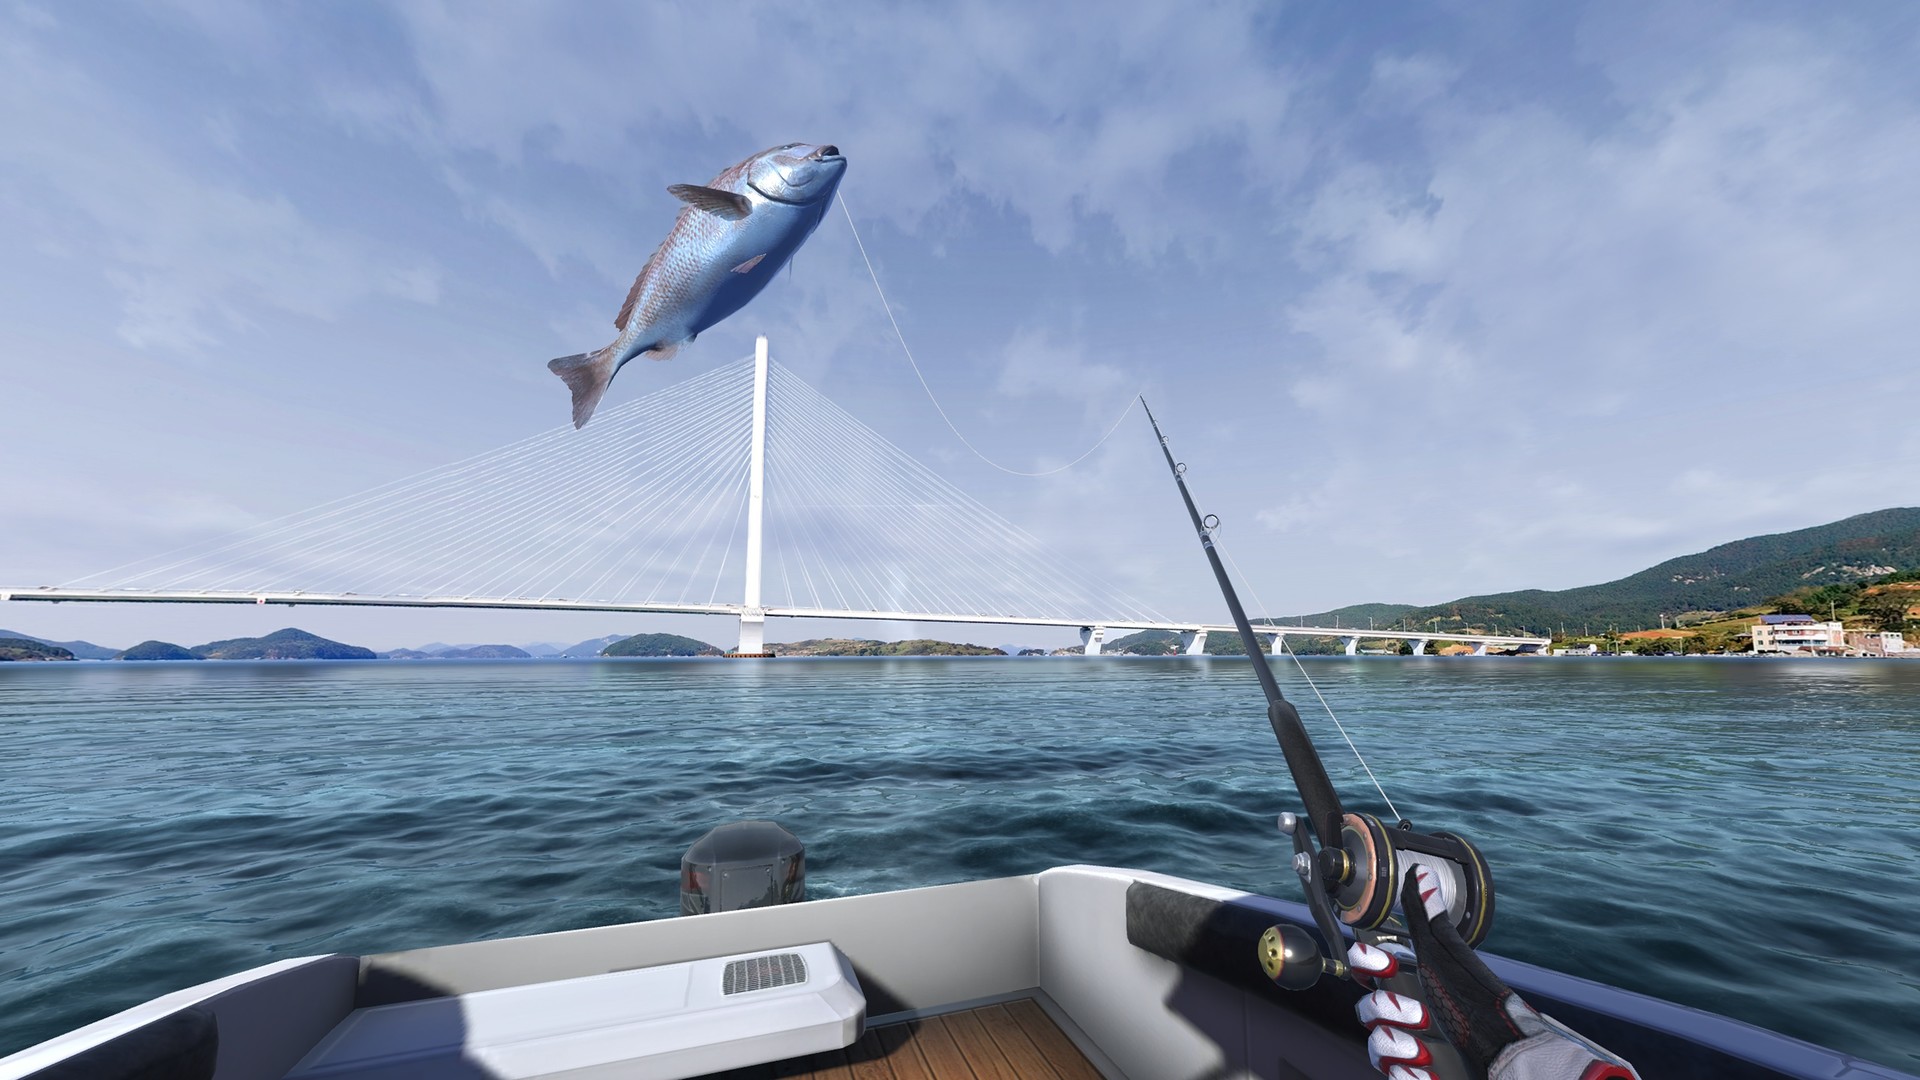 Real VR Fishing on Steam